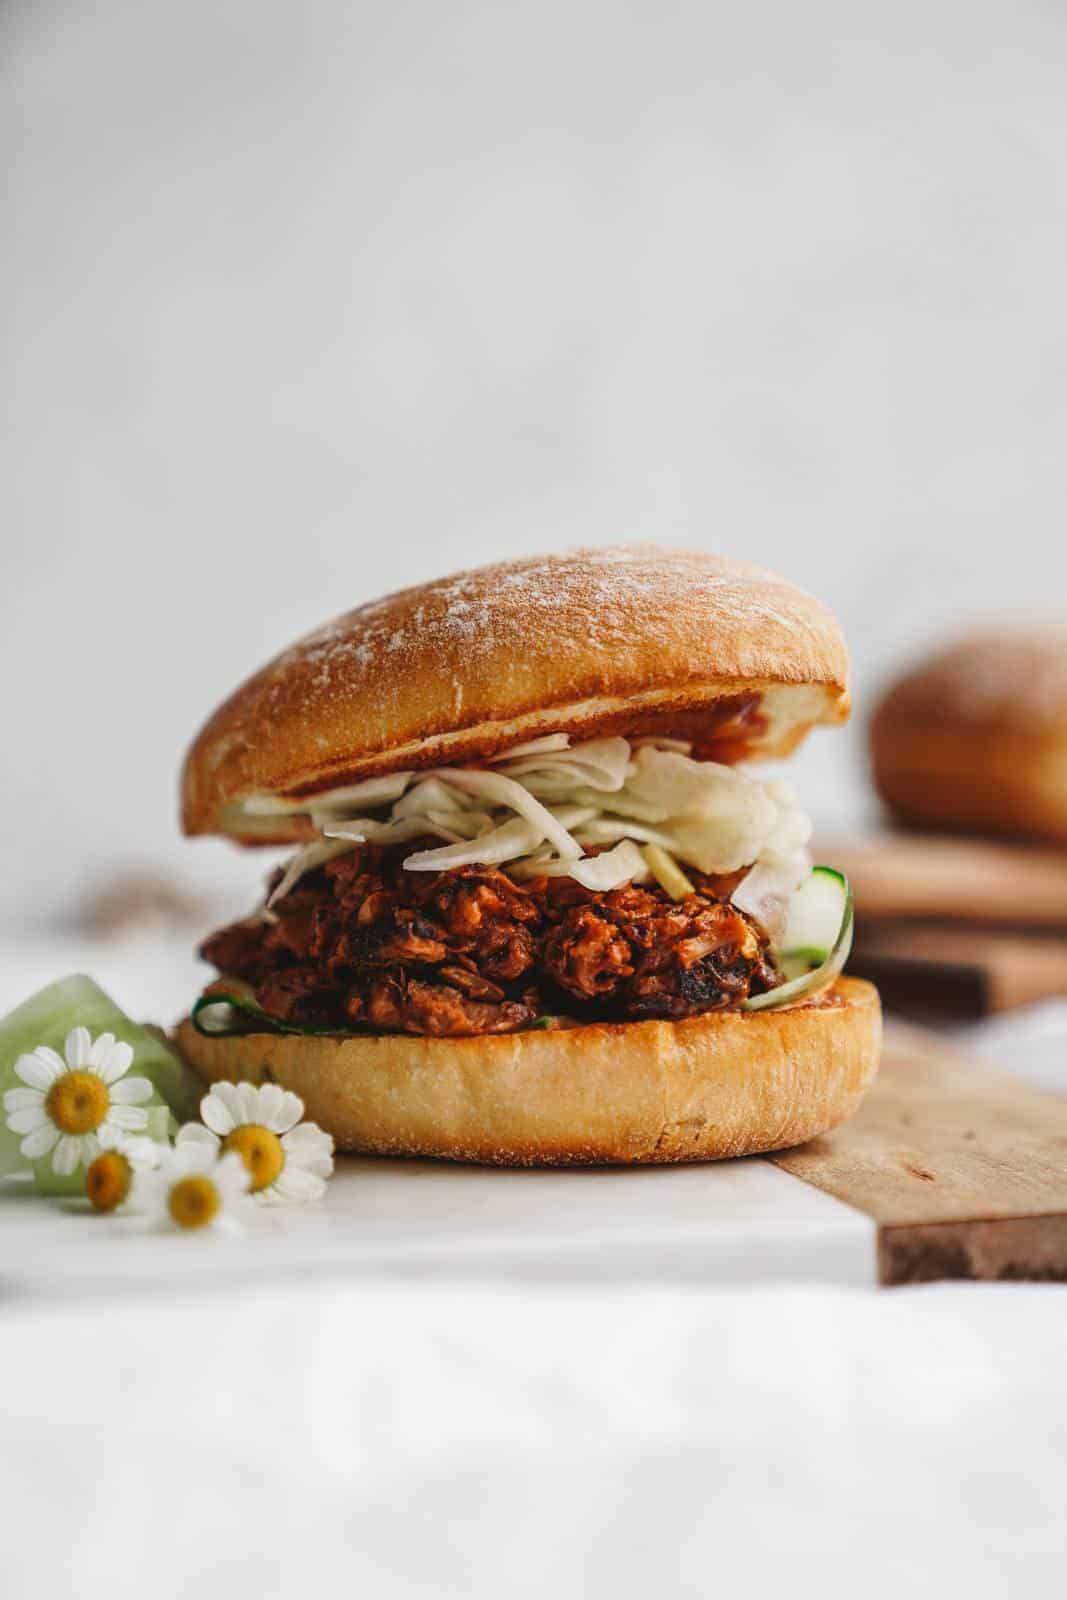 A jackfruit pulled pork burger sitting on cutting board with flowers.